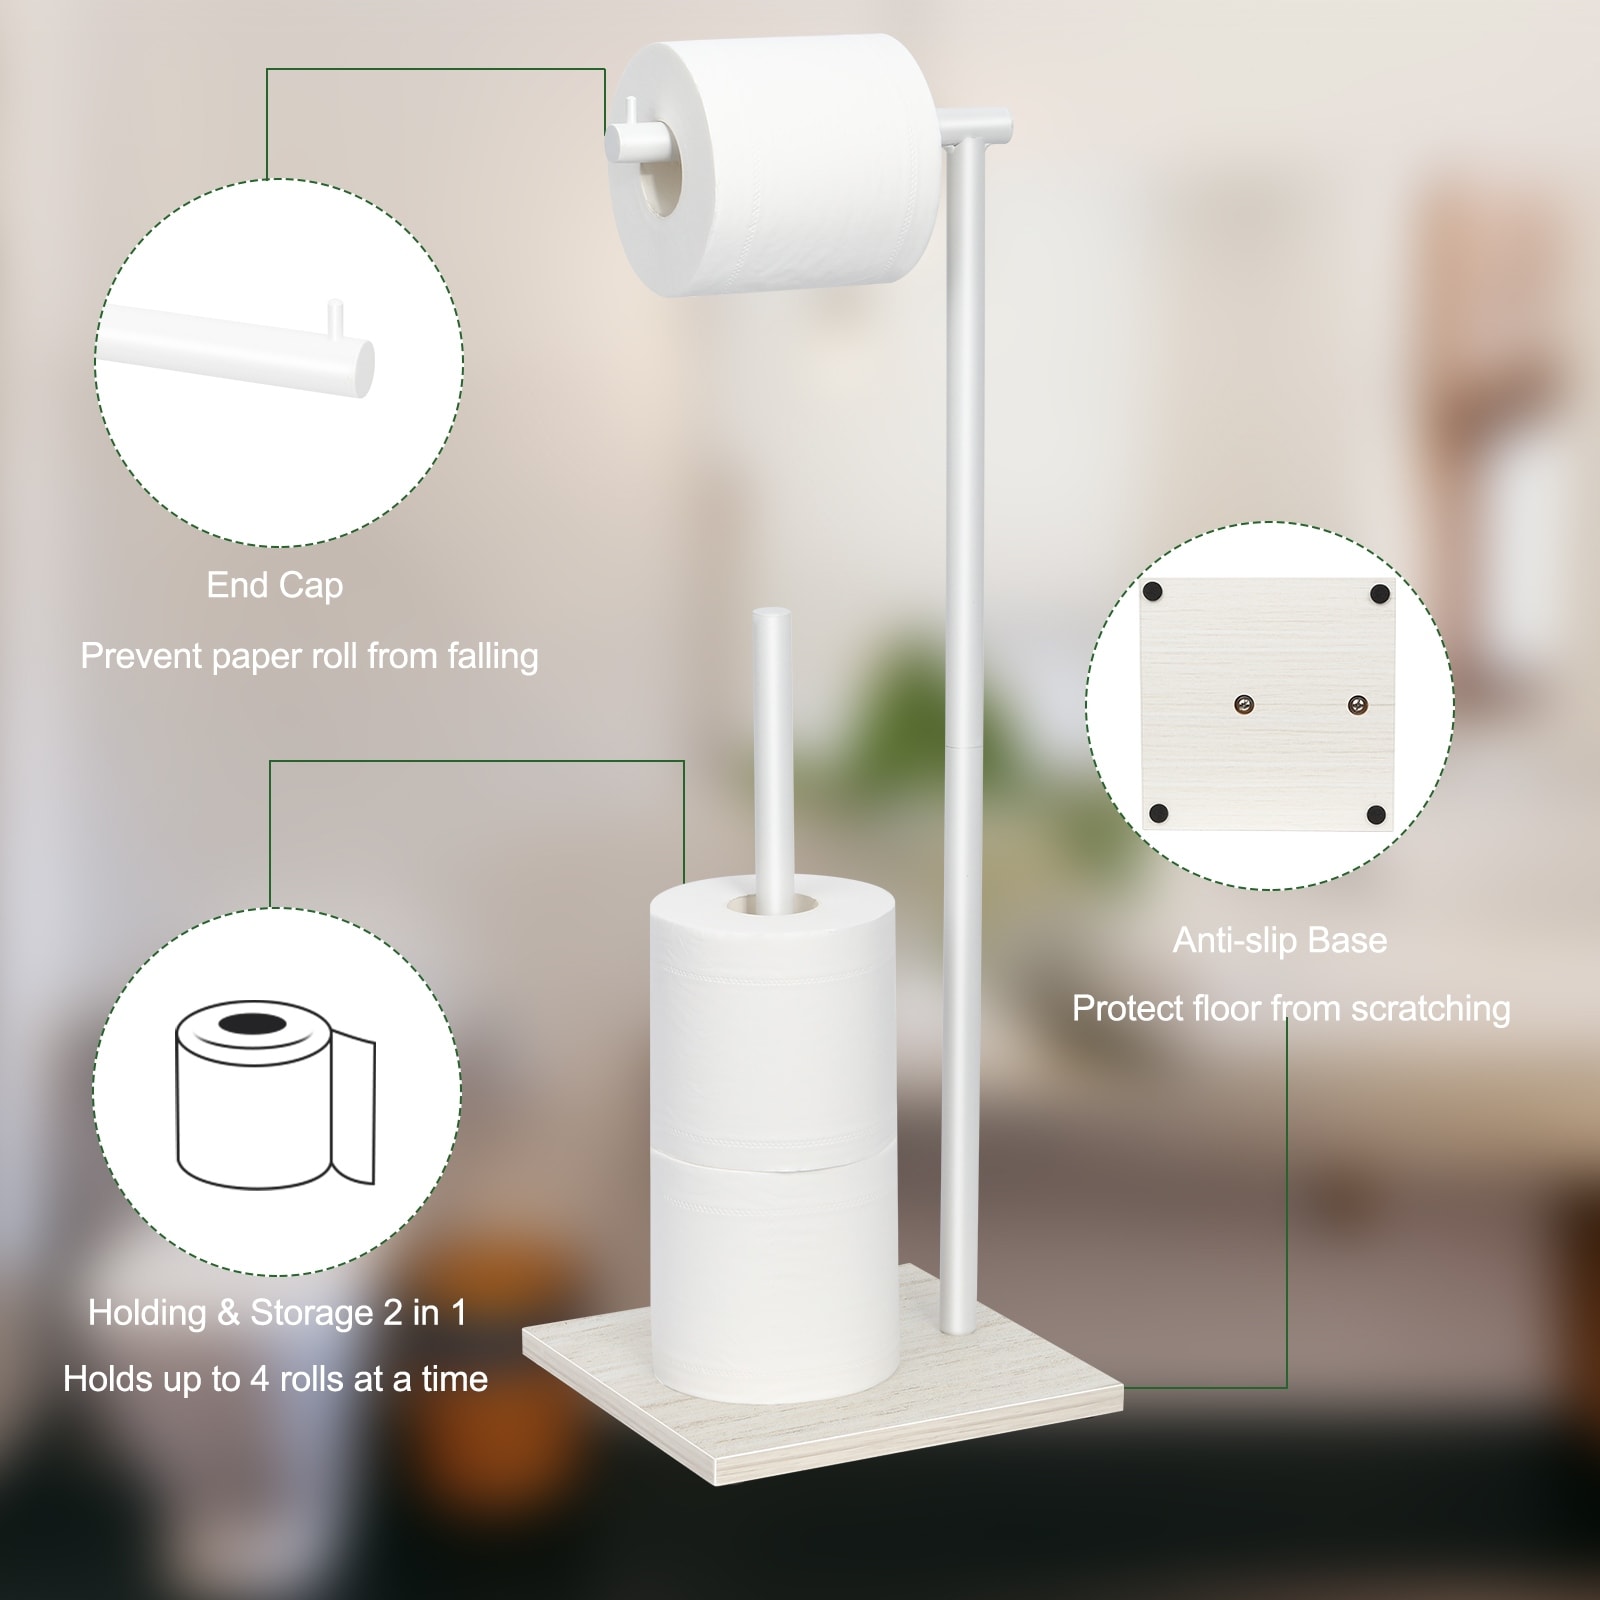 https://ak1.ostkcdn.com/images/products/is/images/direct/34ec599a5e3ae7f4c9bc6b338b45548c8ffb1ddc/Bathroom-Toilet-Paper-Holder-Stand-with-Reserve.jpg